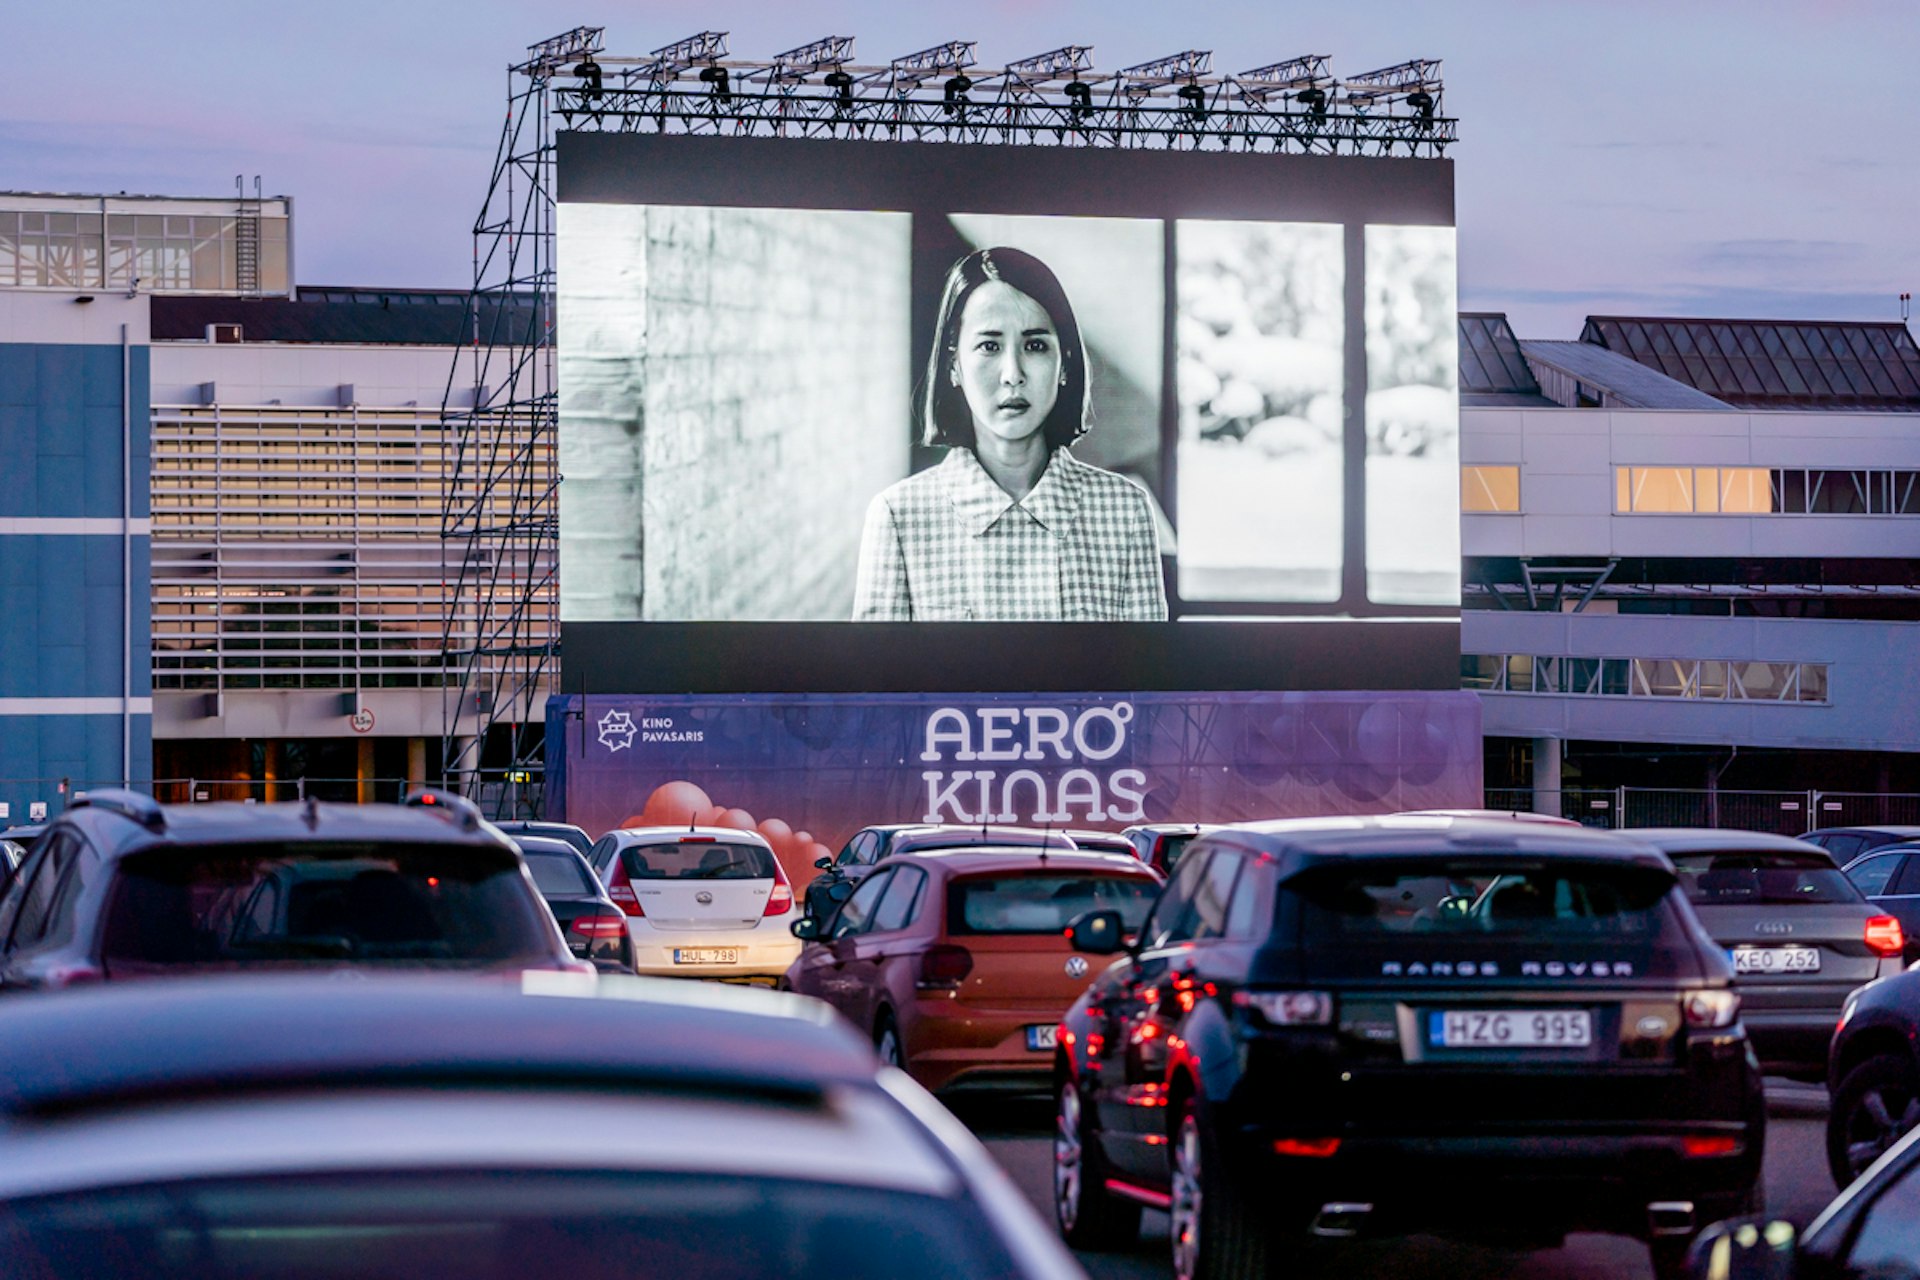 A film showing on the screen at the Vilnius Drive in Movie theatre